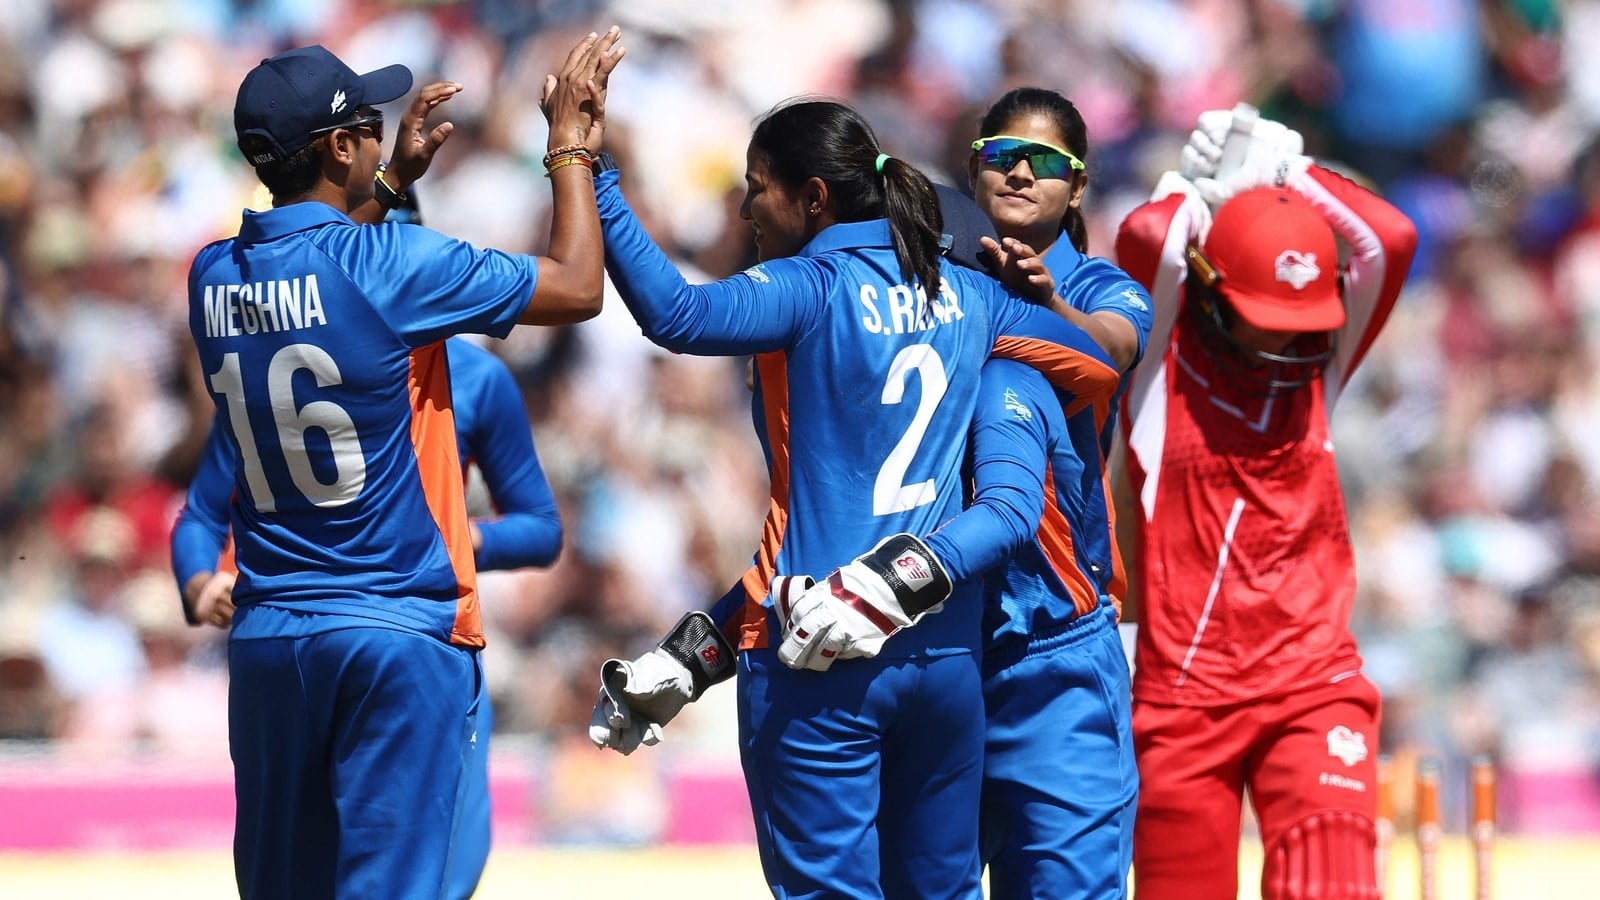 India vs England Highlights Semi-Final Commonwealth Games 2022: IND W defeat ENG W by 4 runs to reach CWG final